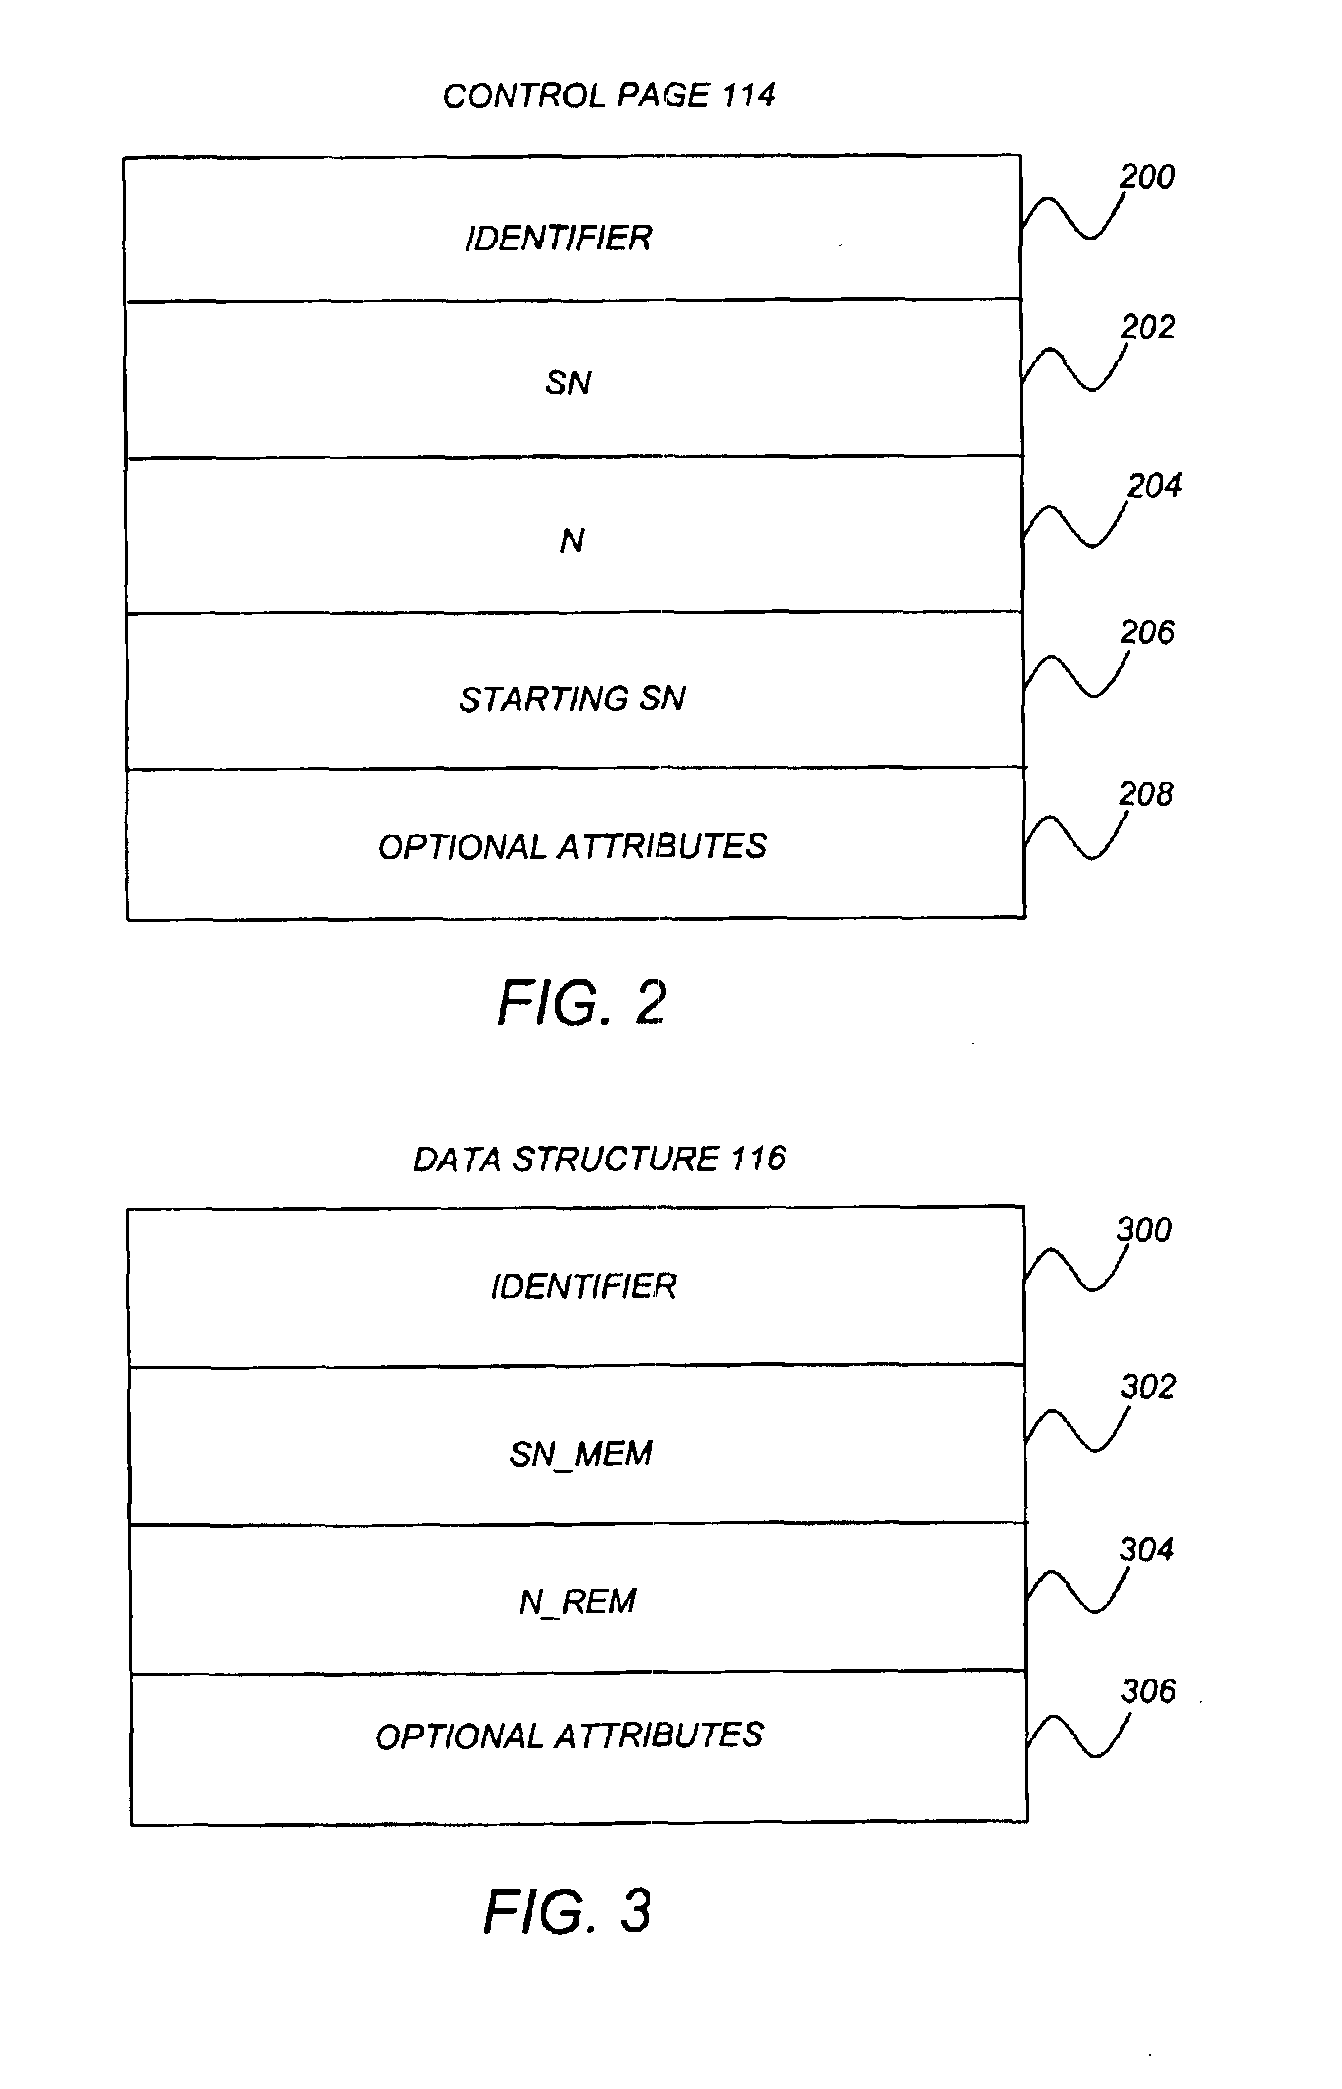 Efficient sequence number generation in a multi-system data-sharing environment